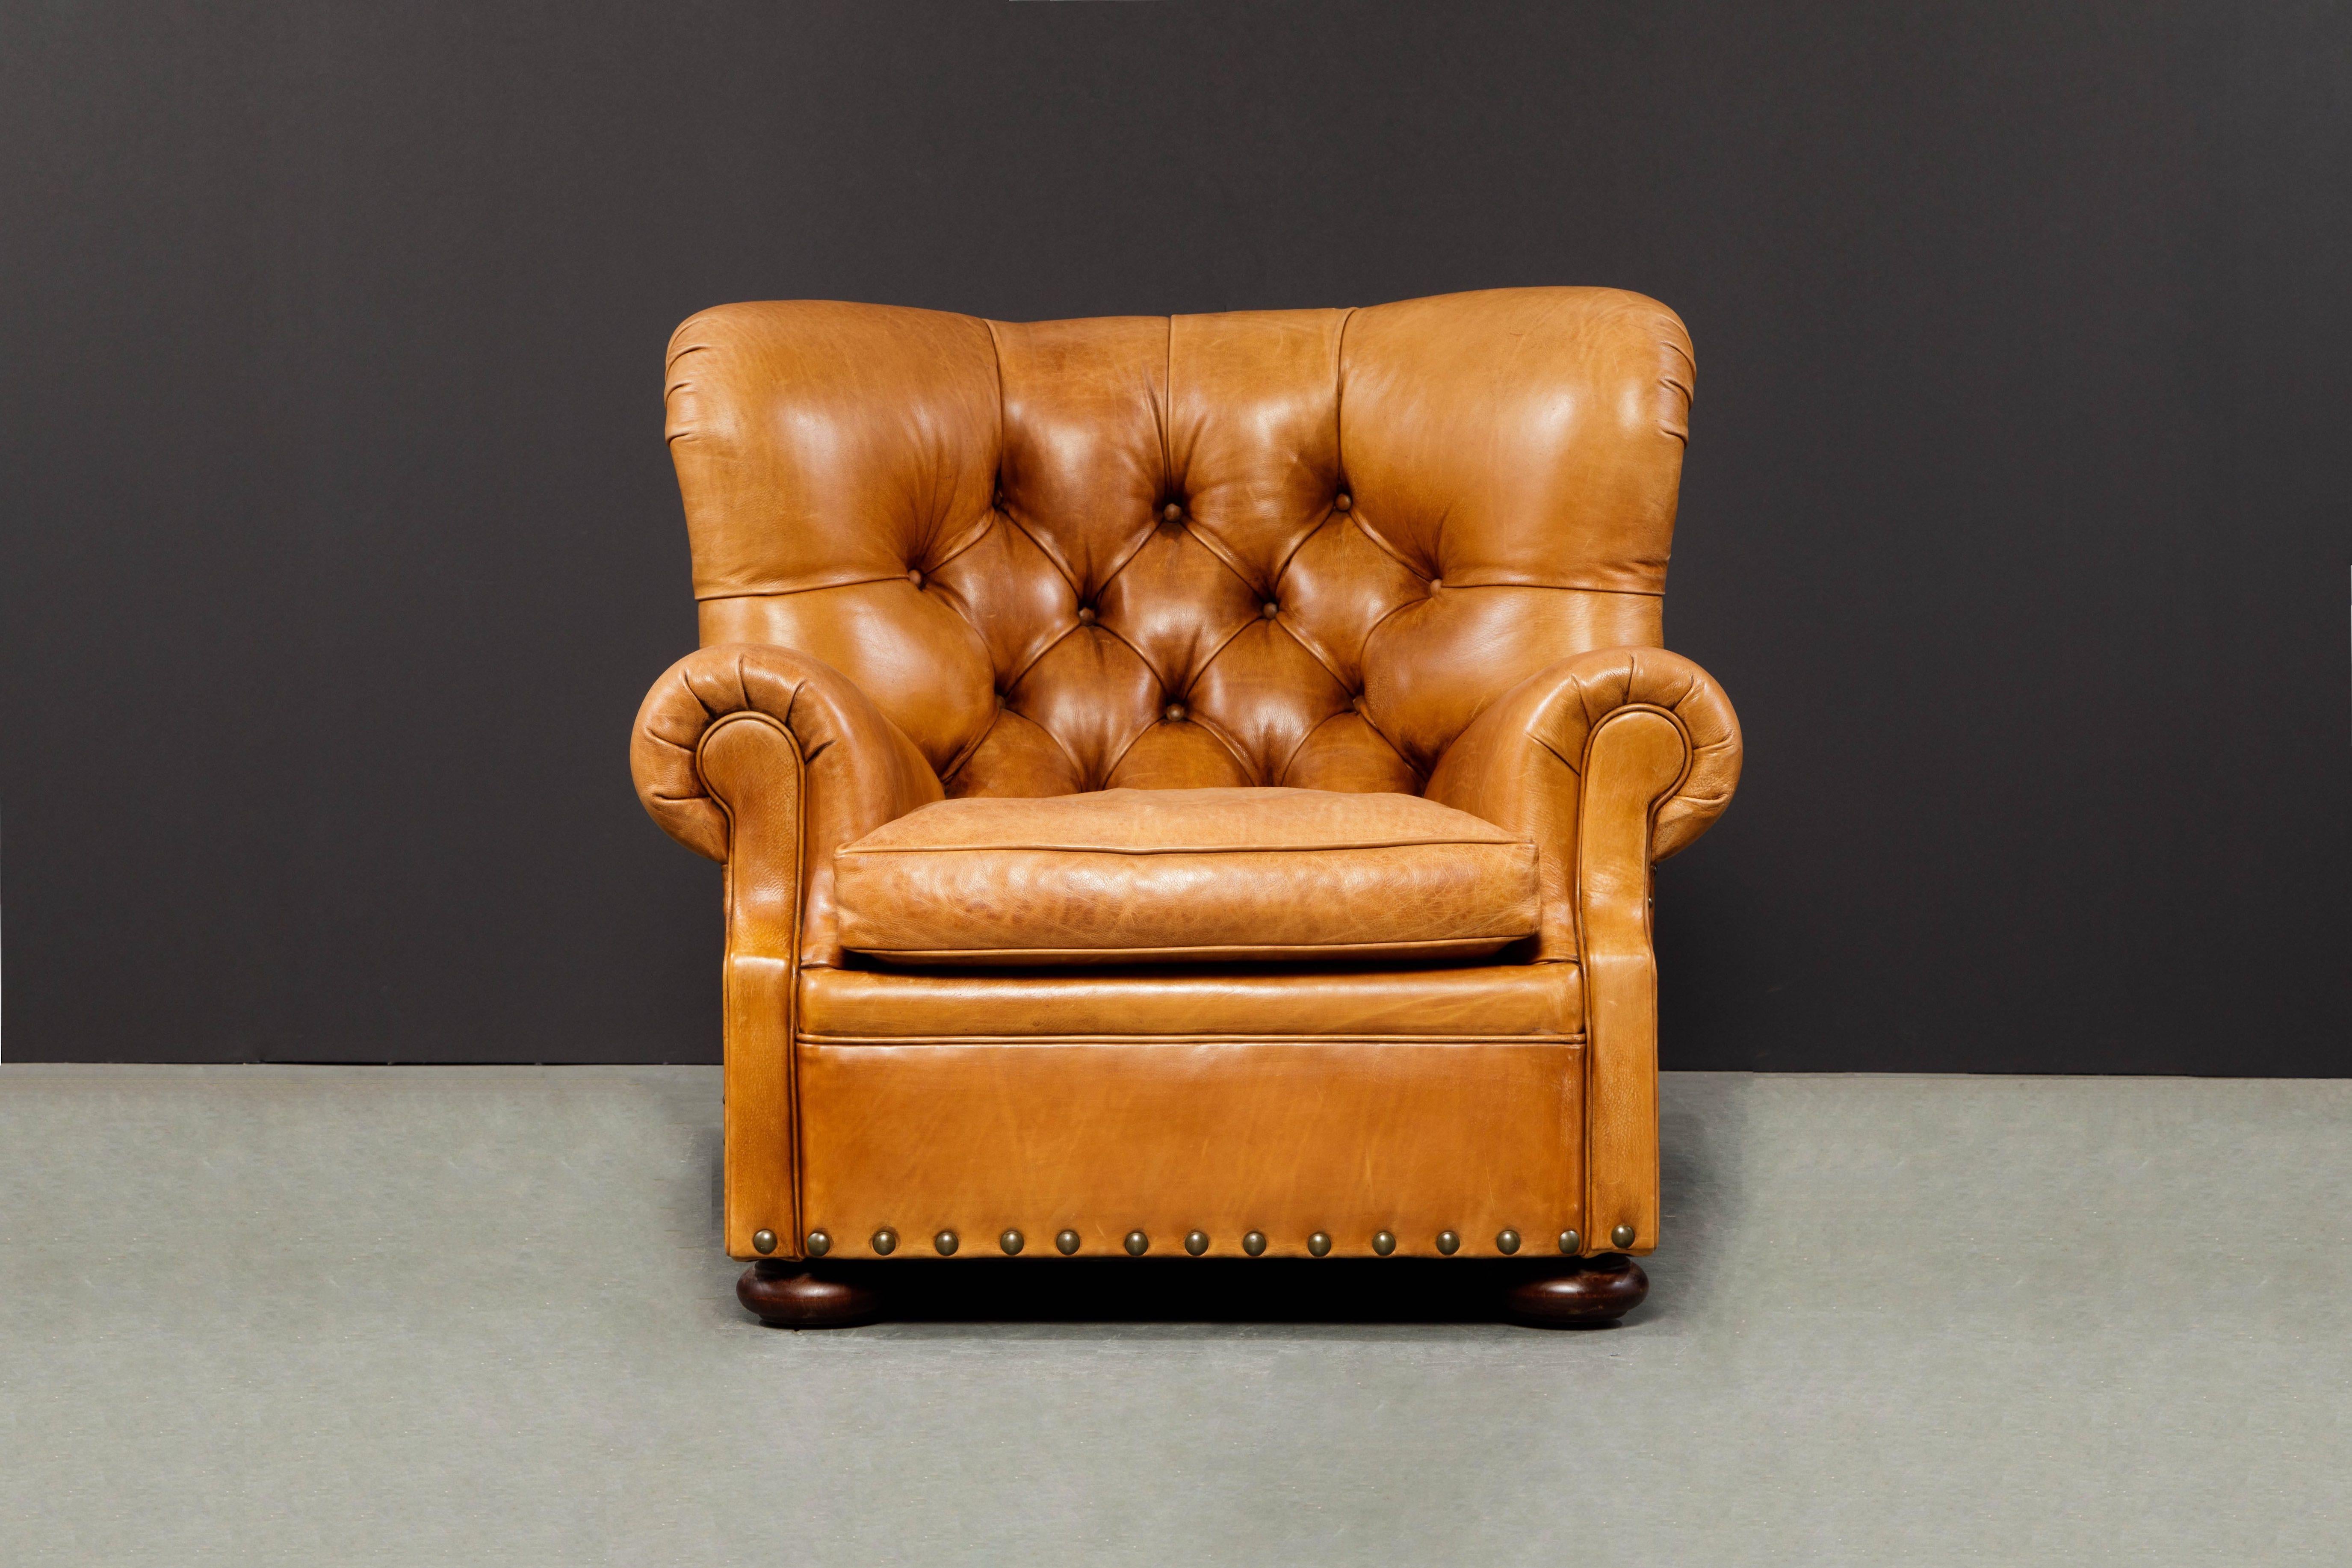 This gorgeous 'Writers' wingback club chair by Henredon for Ralph Lauren has such incredible leather, very thick and quality natural hides were used in it's making. The original Writer's Chairs retailed by Ralph Lauren have been produced by Henredon